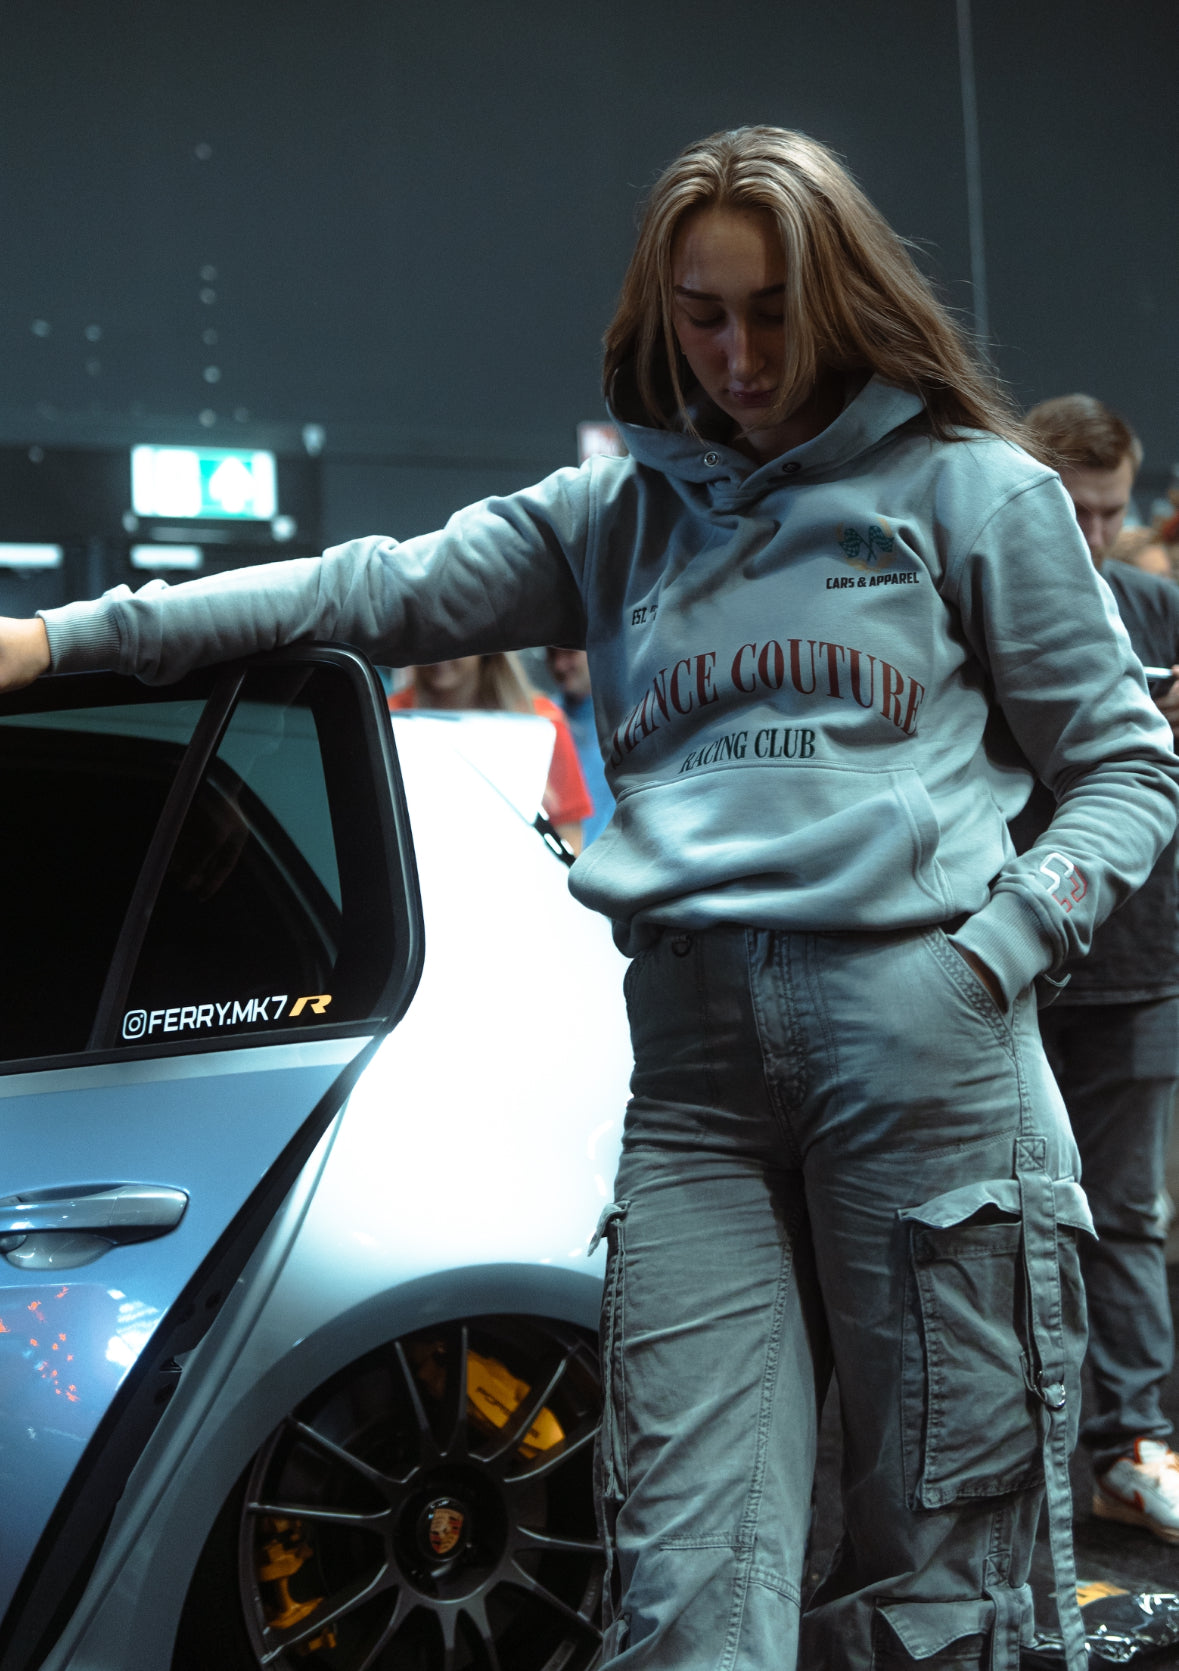 Stance couture Racing club hoodie